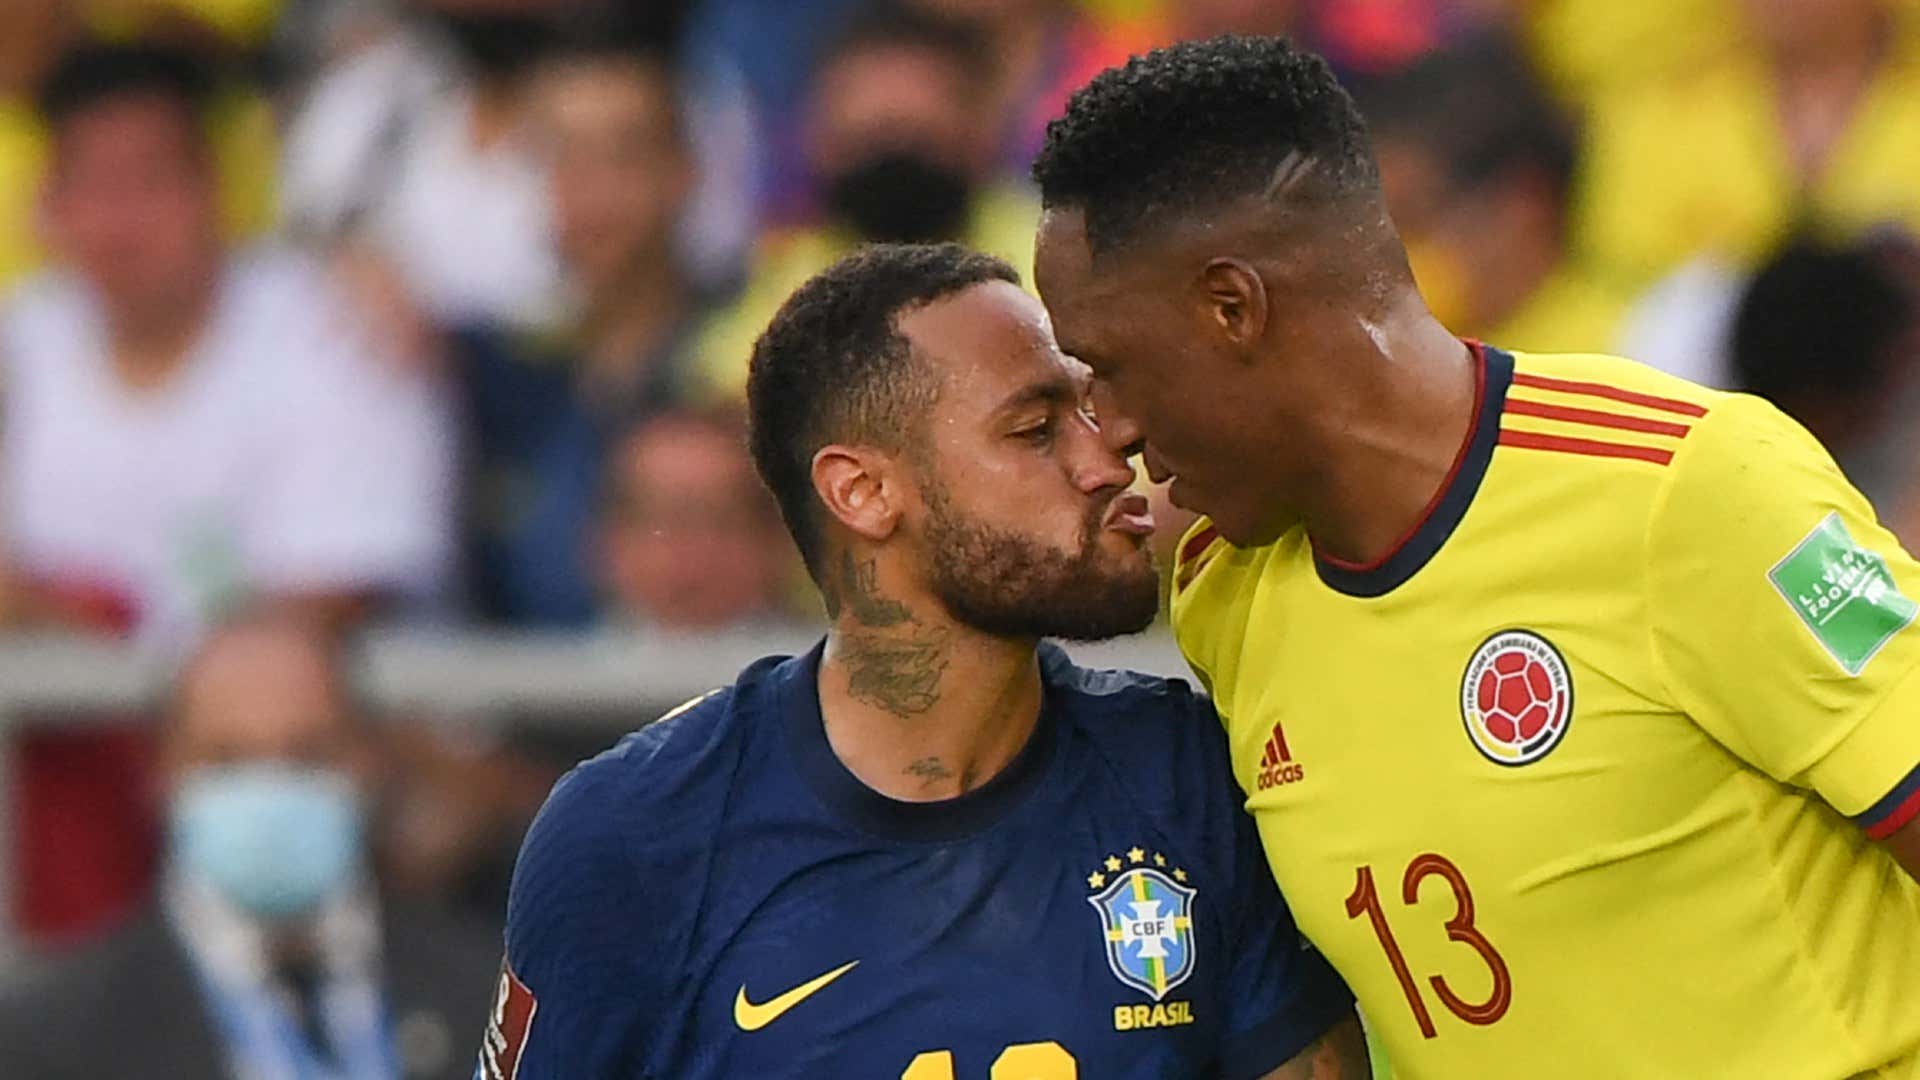 'Neymar can't make the difference all the time' - Tite defends 'exceptional' Brazil star after Colom